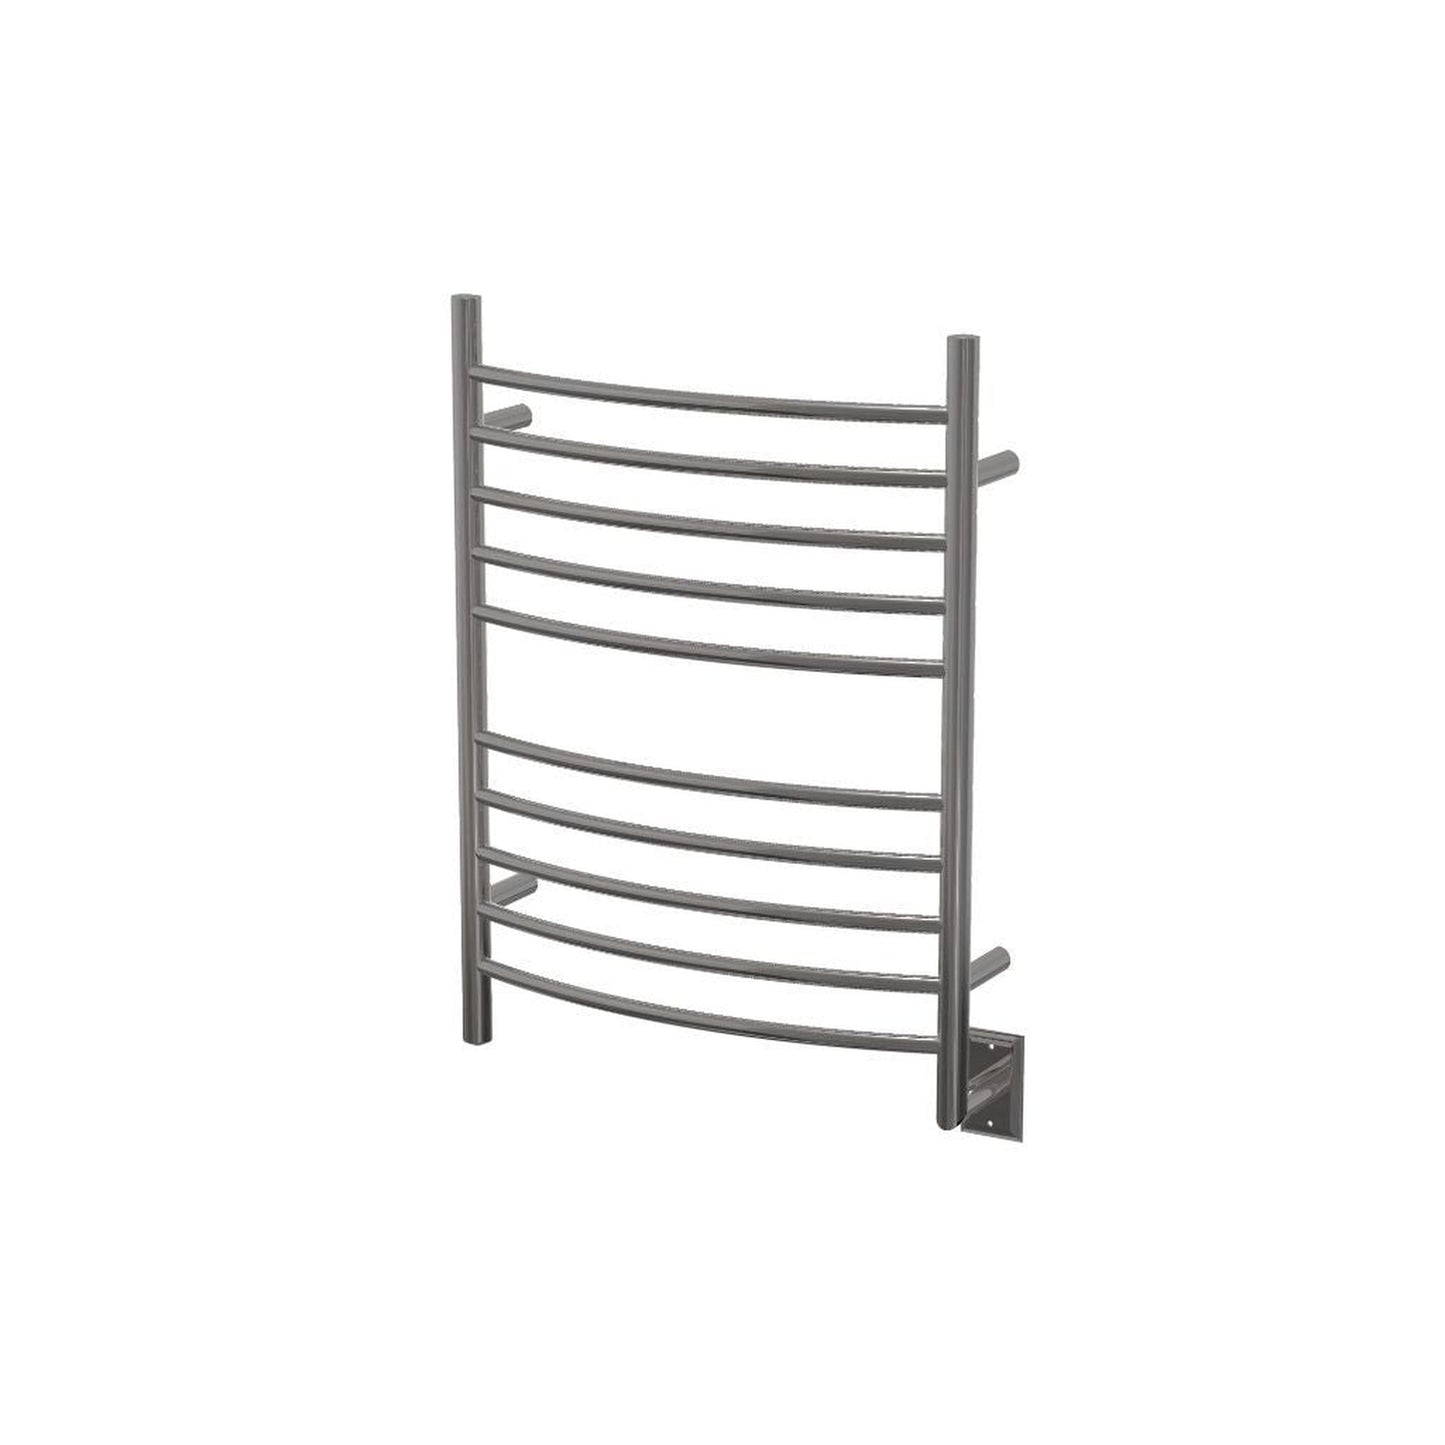 Amba Radiant Curved 10-Bar Polished Stainless Steel Hardwired Towel Warmer With Integrated On/Off Switch